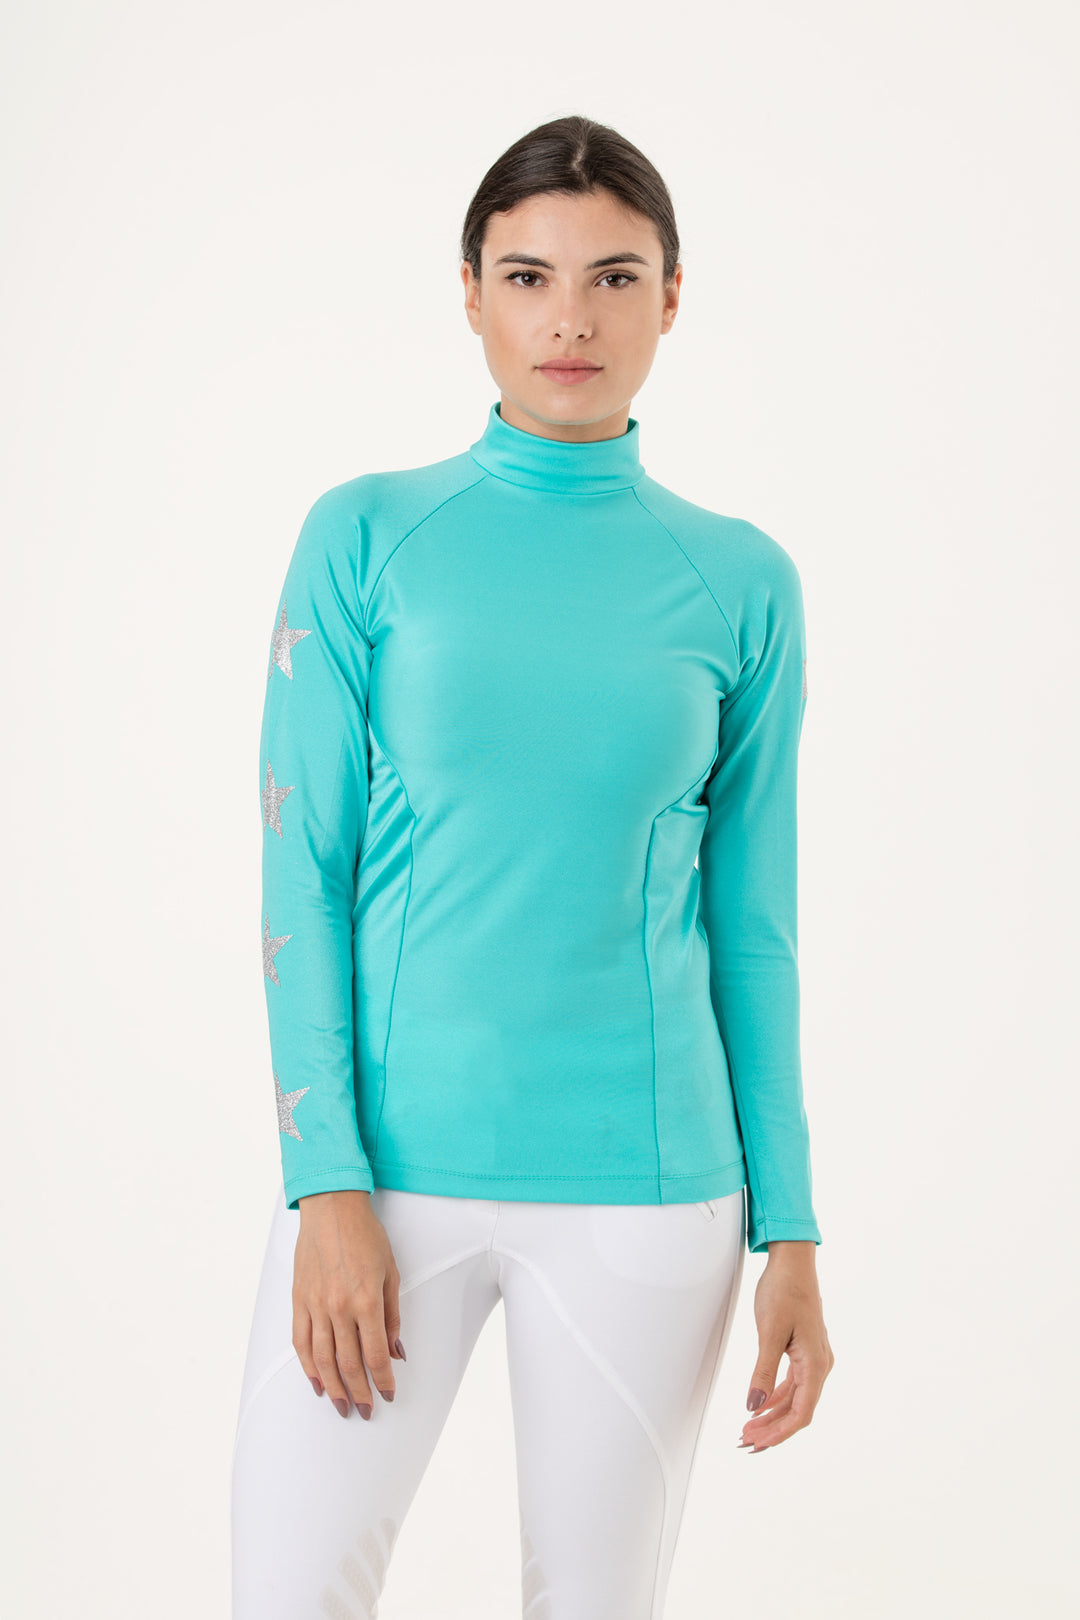 Turquoise Constellation Base Layer